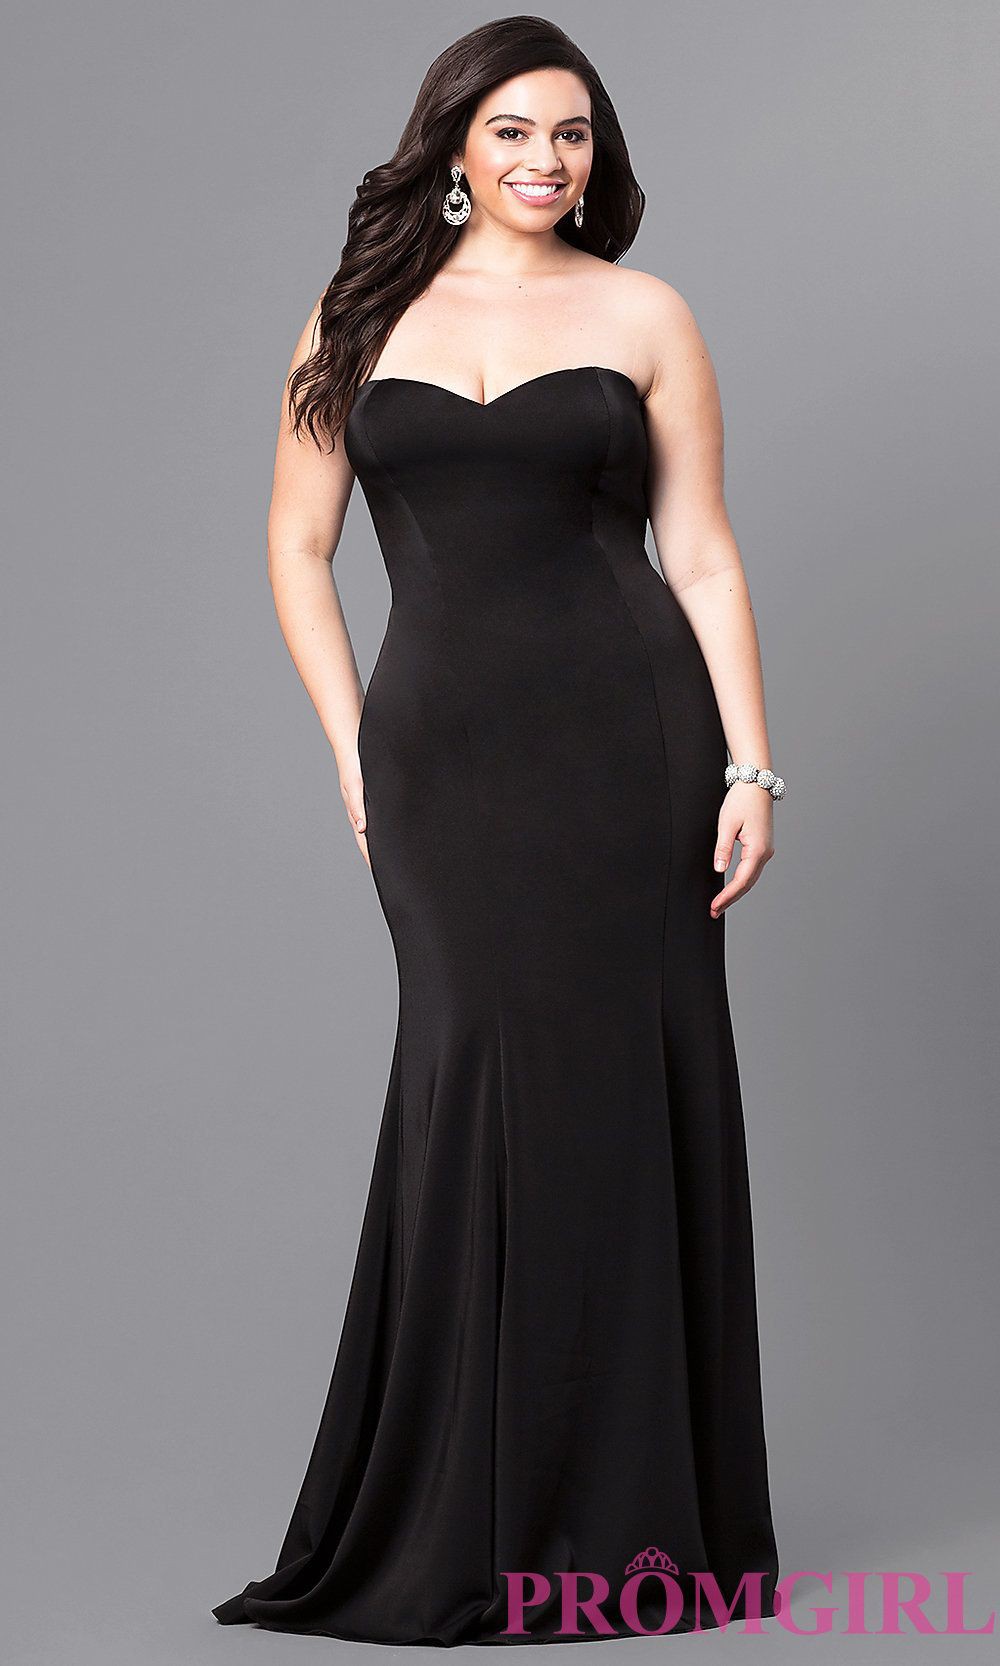 Full-Figure Dresses and Plus-Size Prom Gowns -PromGirl - PromGirl Beautiful Cocktail Dress For Plus Size Women: Cute Cocktail Dress,  Cocktail Outfits Summer,  Cocktail Party Outfits,  Cocktail Plus-Size Dress,  Plus Size Party Outfits  